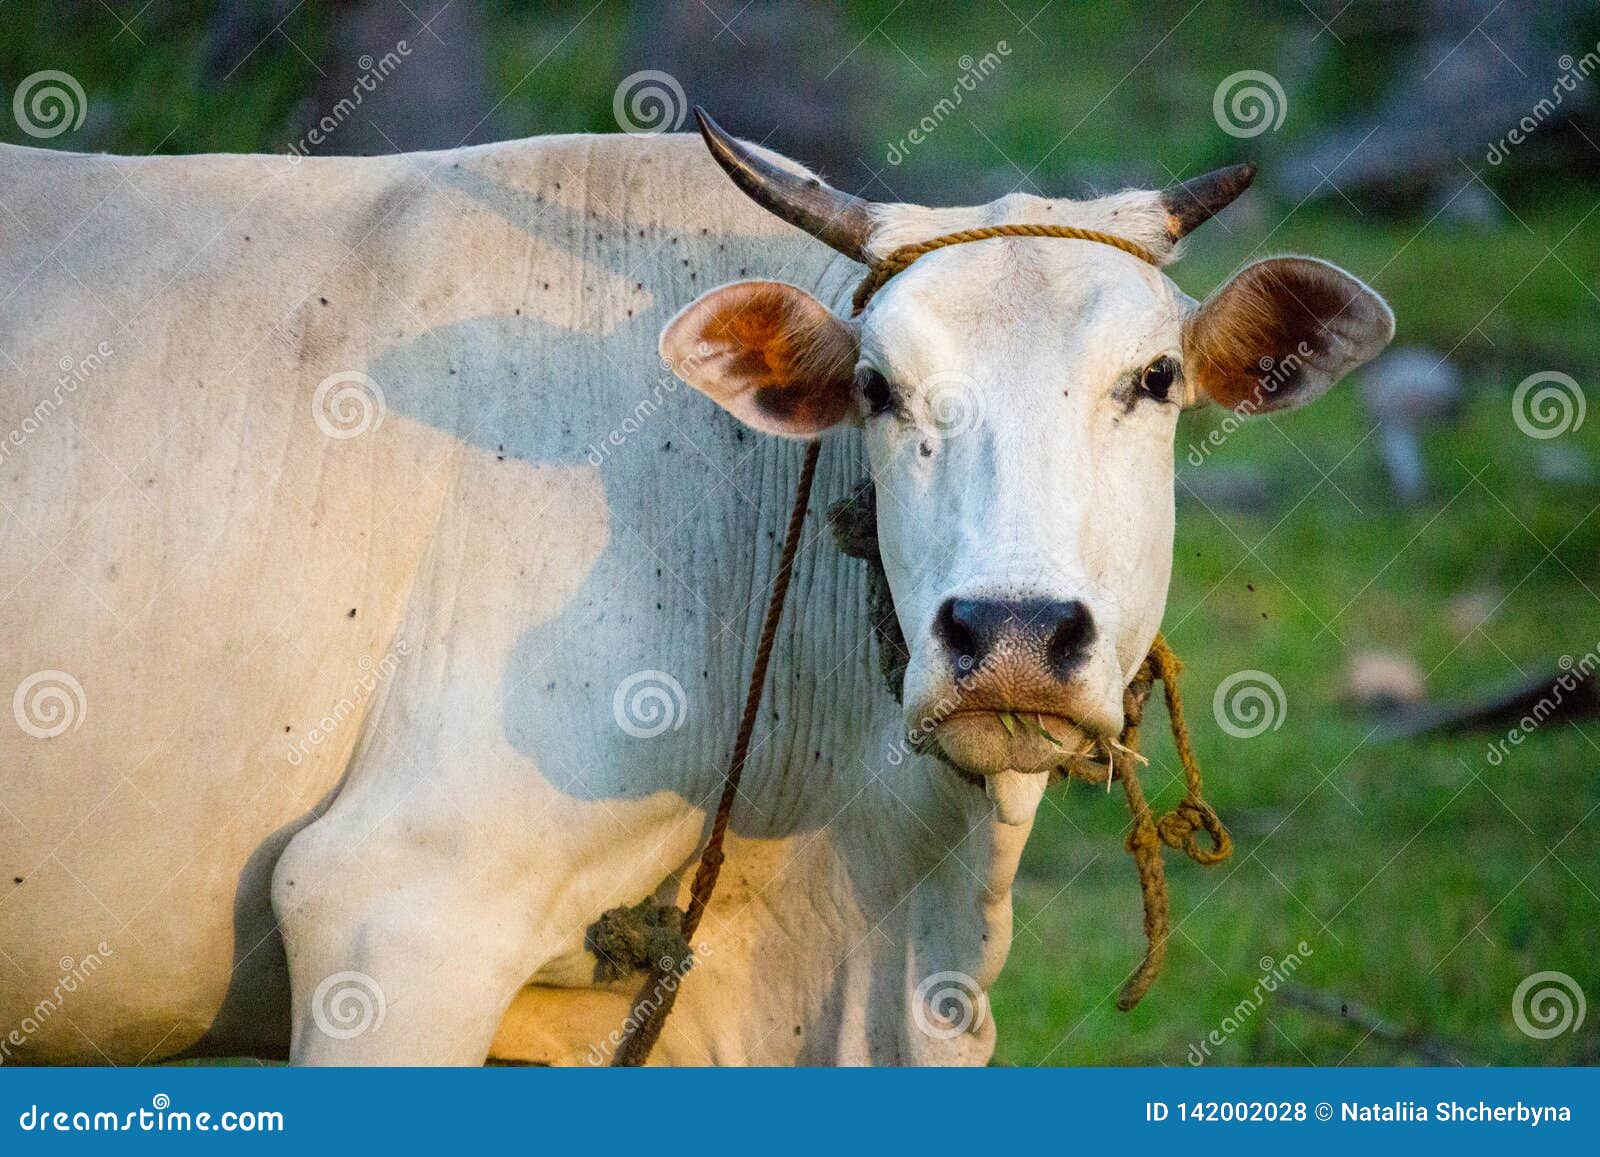 White Cow with Horns Looking at Camera in Summer Field. Cattle Farm  Concept. Rural Domestic Animal Stock Photo - Image of background, cute:  142002028